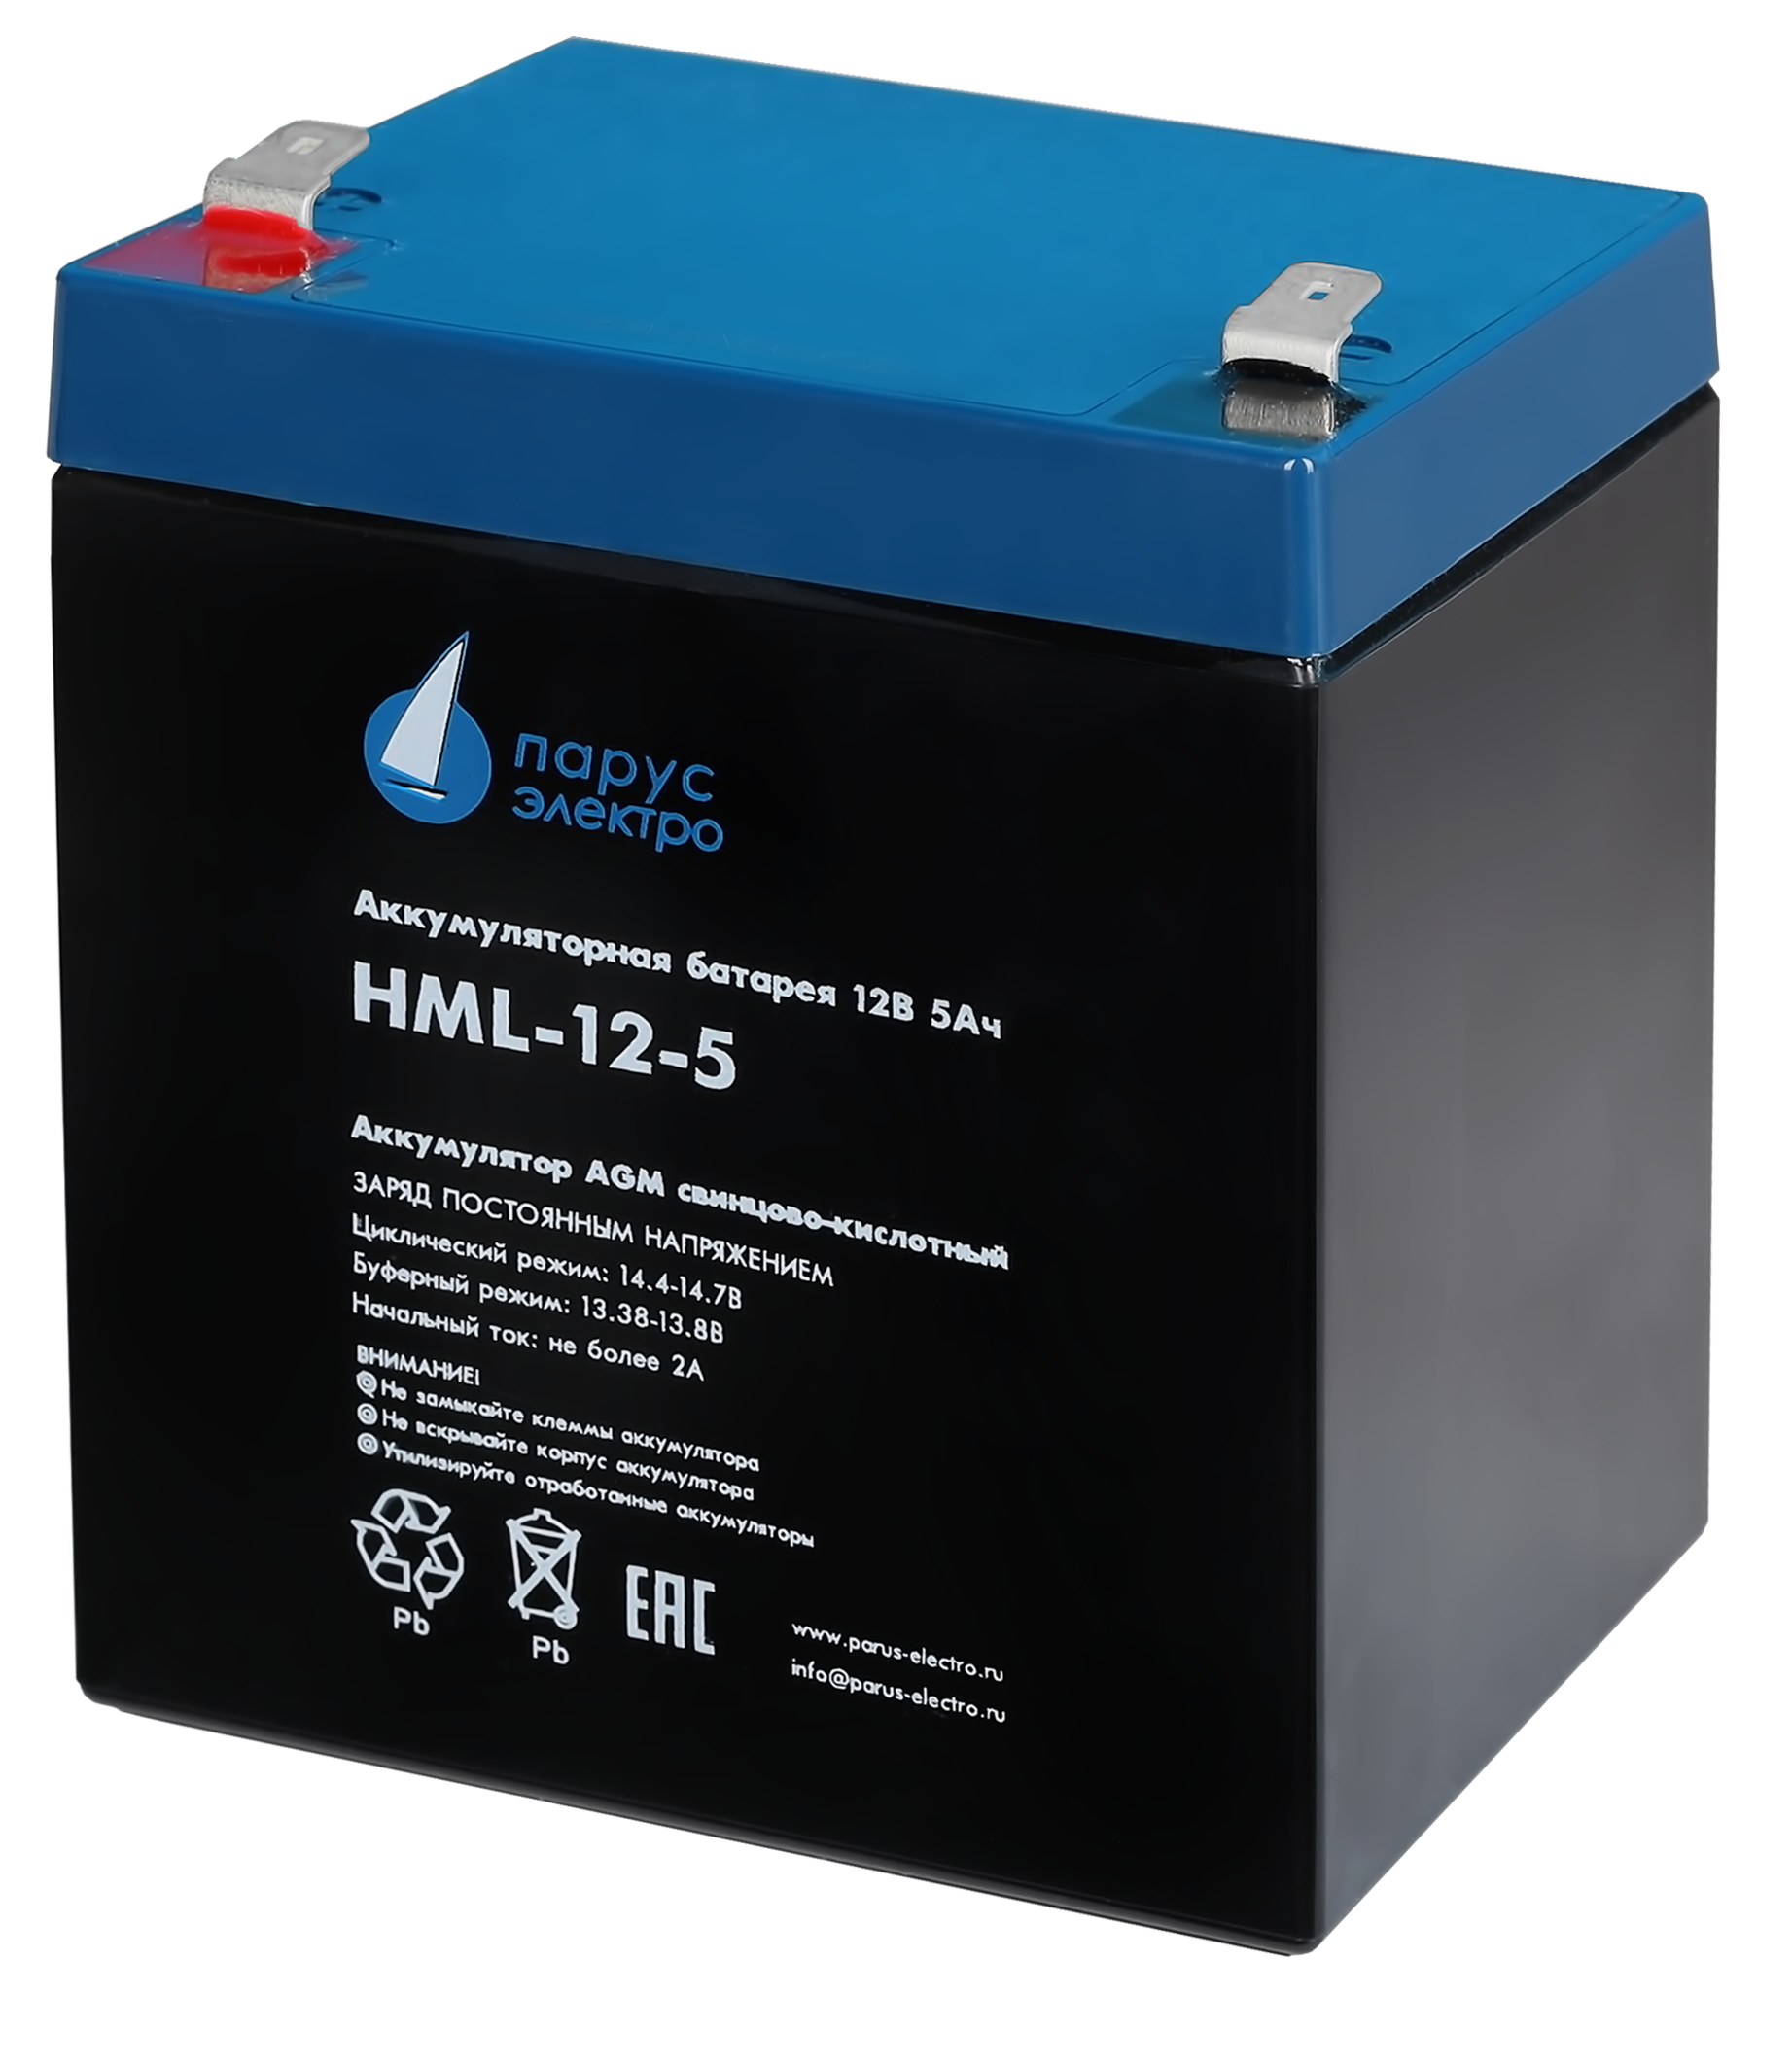 Battery Parus Electro, professional series HML-12-5, voltage 12V, capacity 5.2Ah (discharge 20 hours), max. discharge current (5sec) 75A, max. charge current 2A, lead-acid type AGM, terminals F2, LxWxH 90x70x101mm., total height with terminals 107mm., weight 1.95kg., service life 12 years.